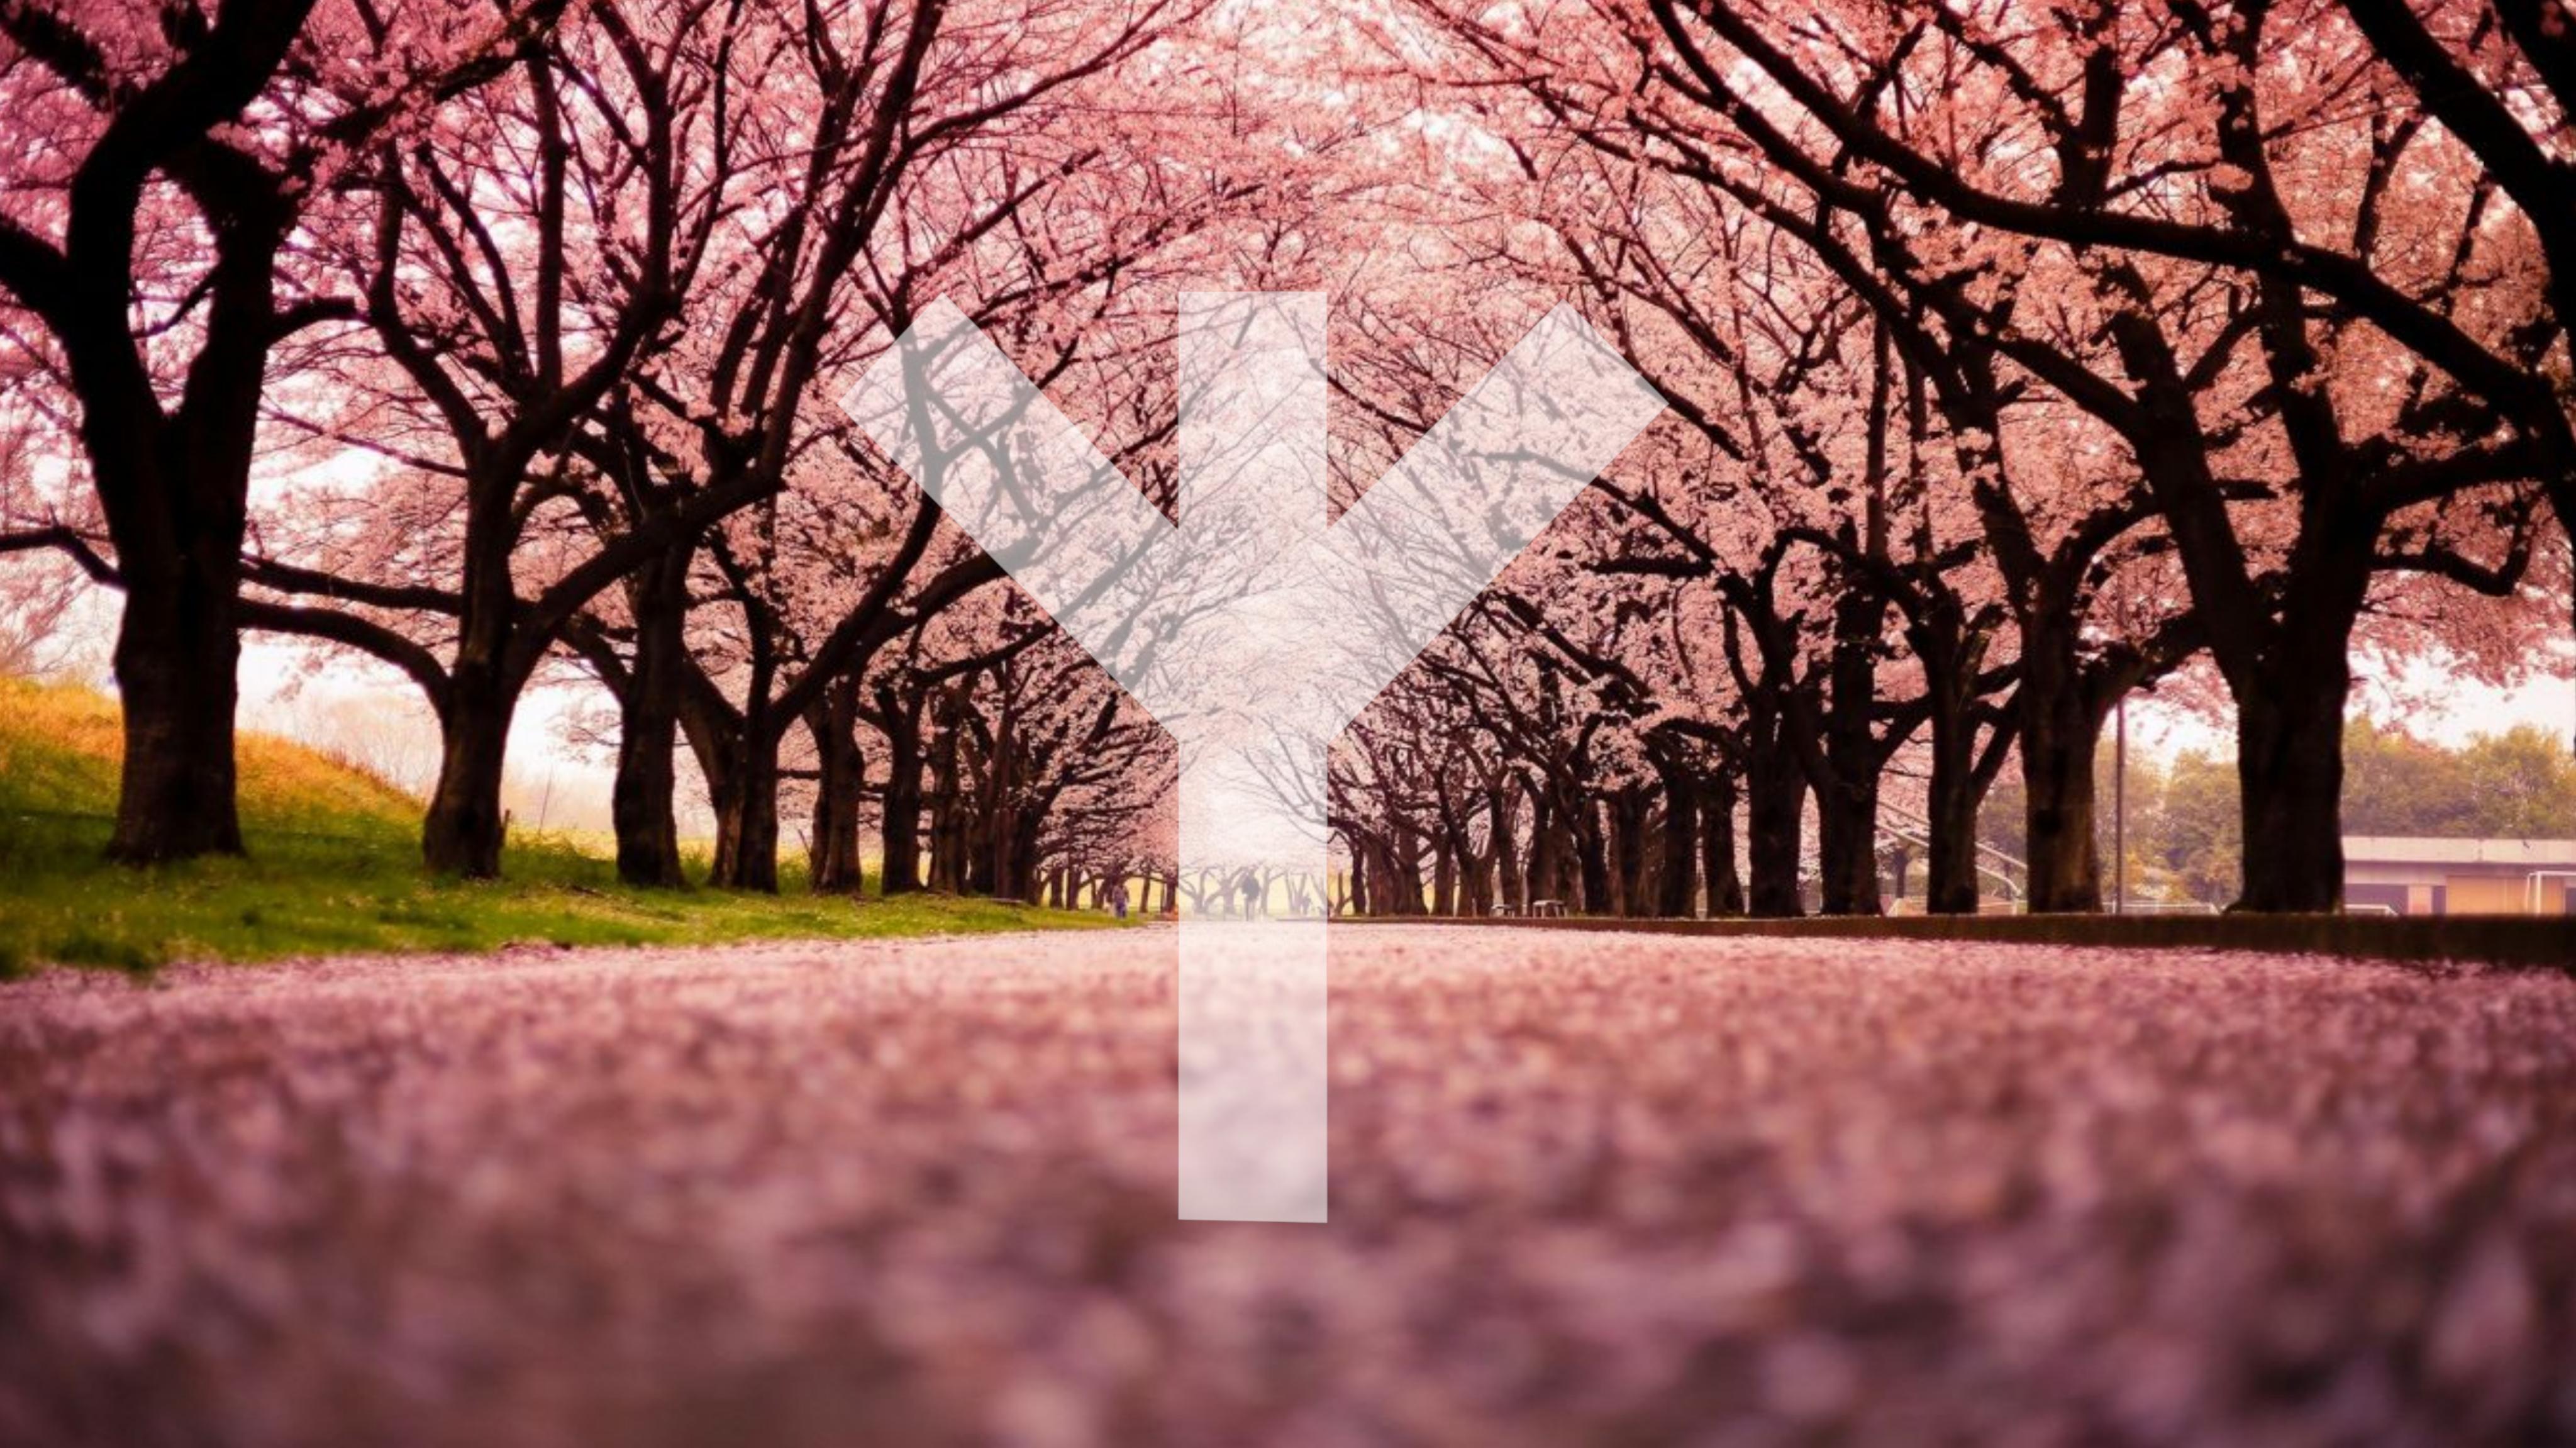 Sakura 4K wallpapers for your desktop or mobile screen free and easy to